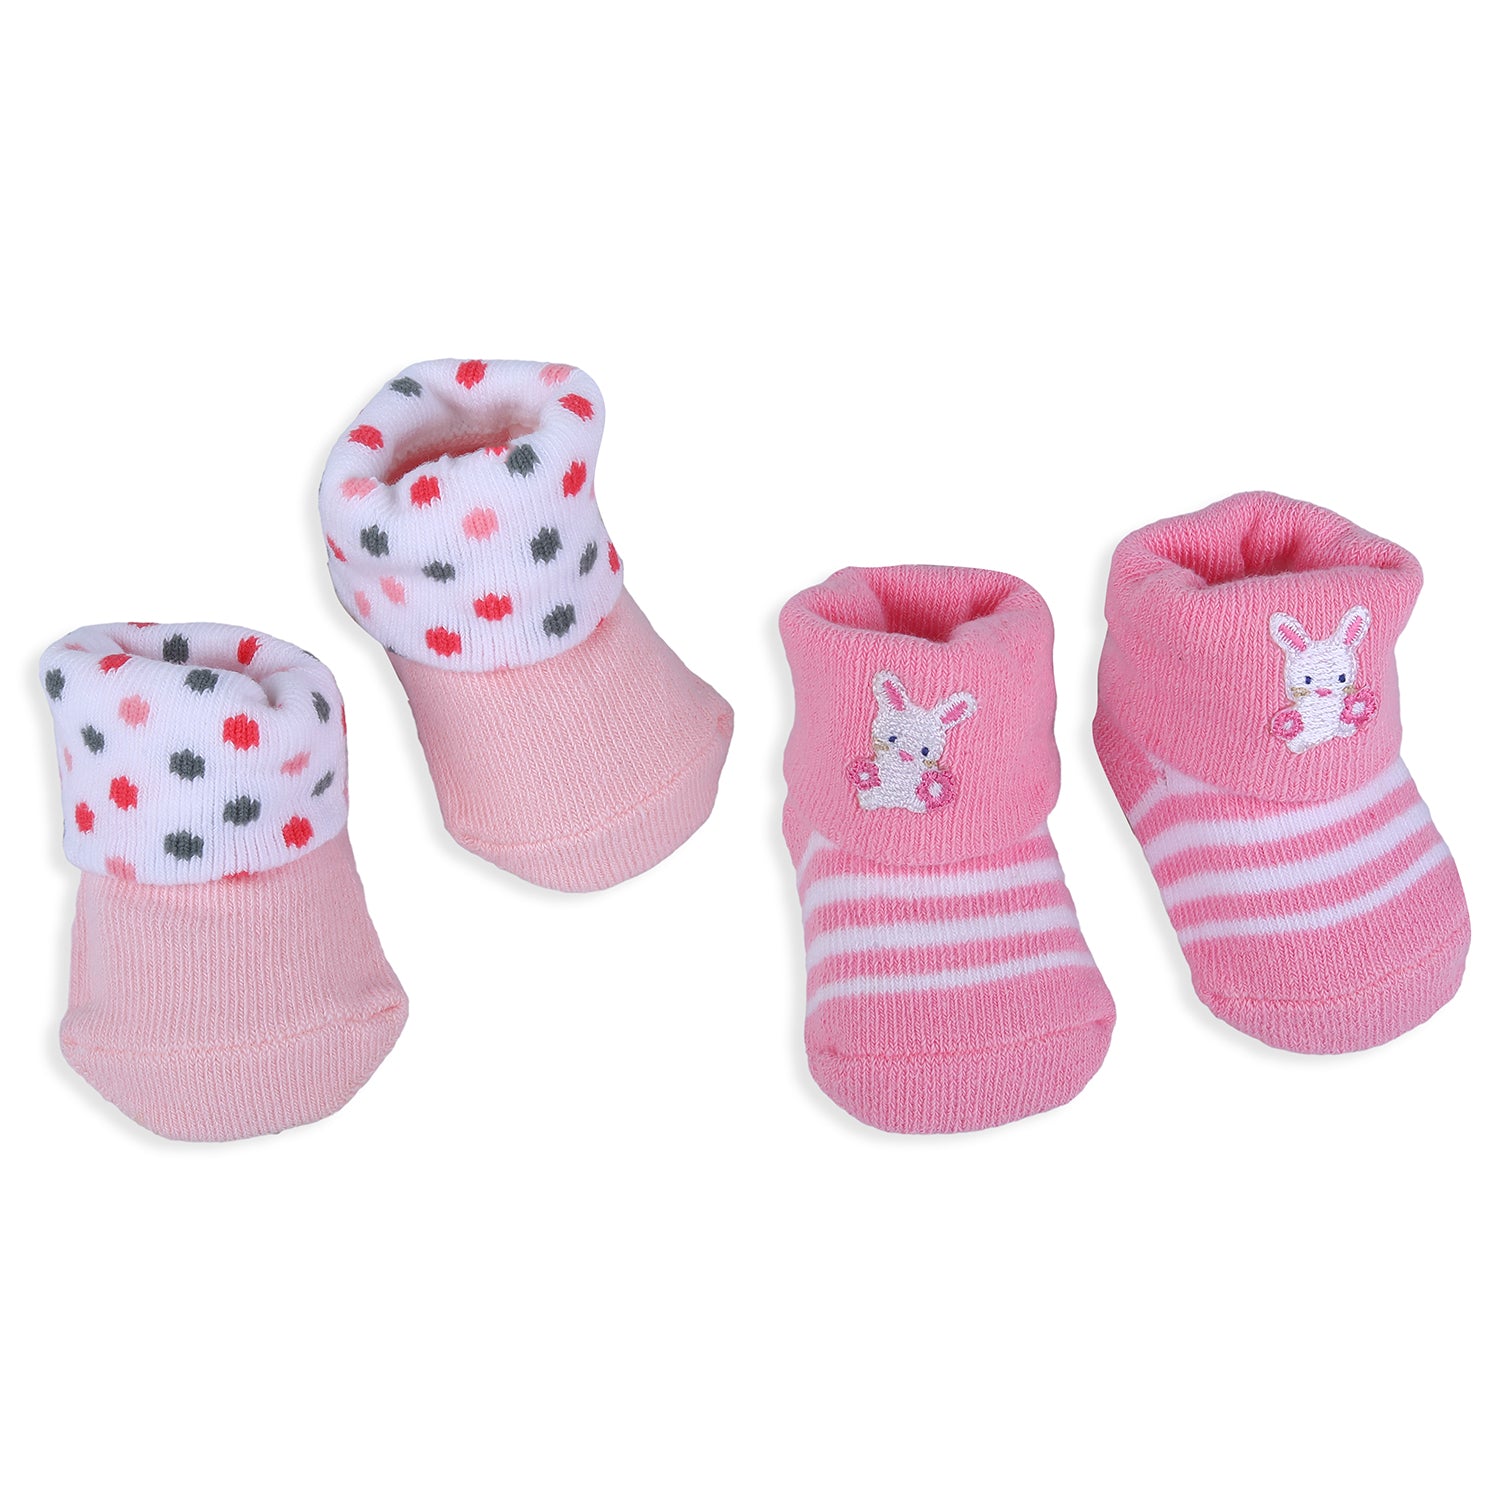 Baby Moo Bunny Polka Dotted Newborn Breathable Infant Cotton Socks - Pink - Baby Moo